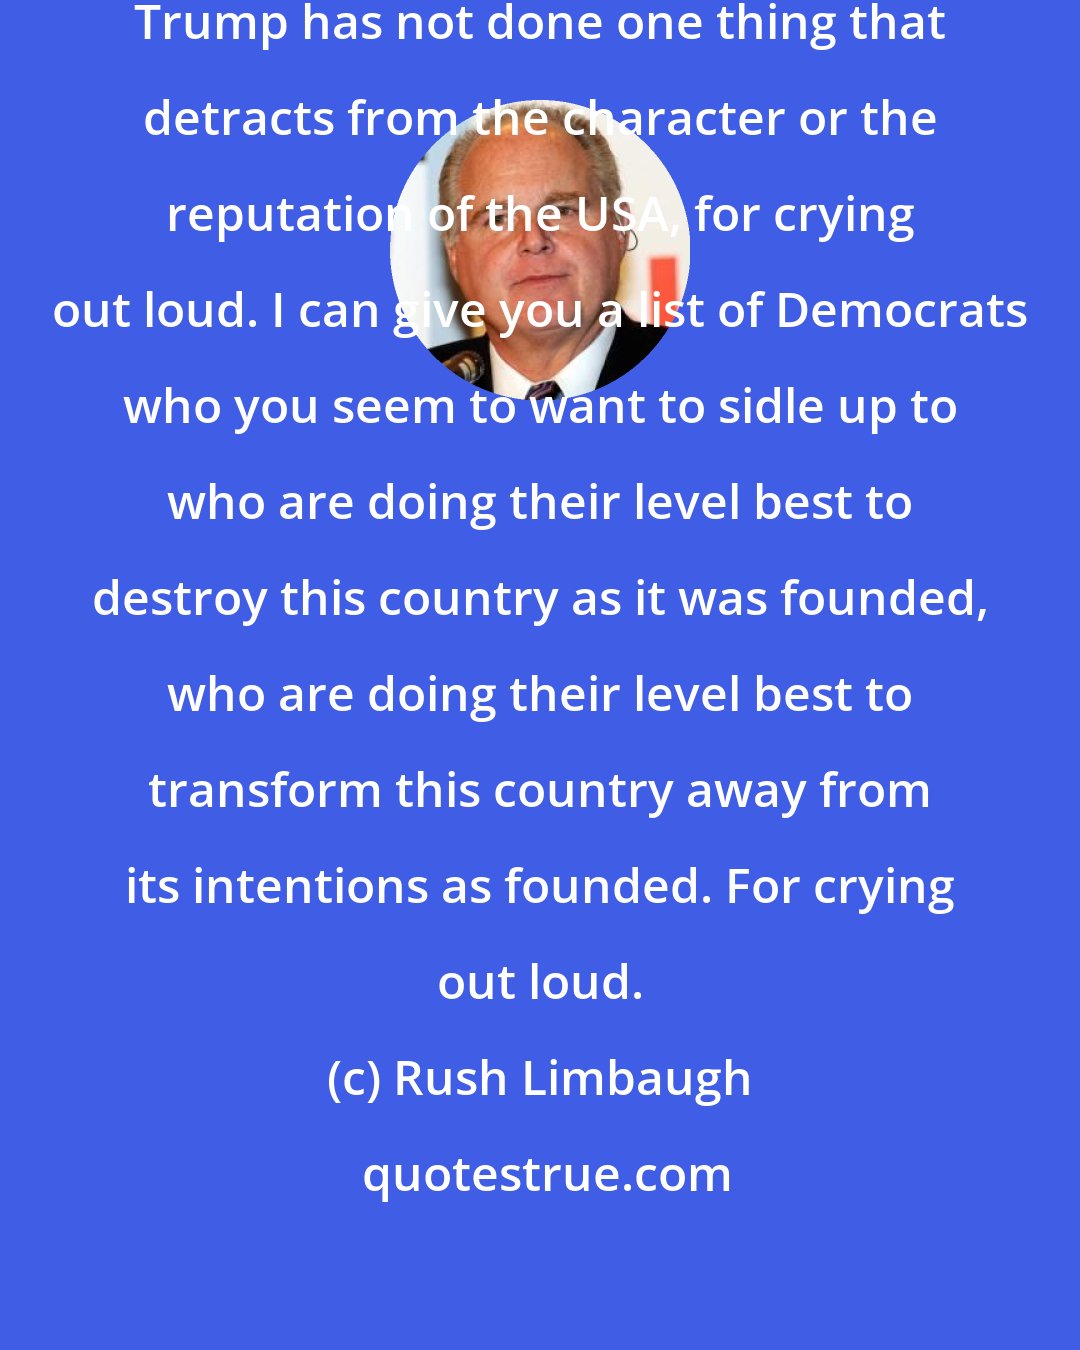 Rush Limbaugh: He may be a lot of things, but Donald Trump has not done one thing that detracts from the character or the reputation of the USA, for crying out loud. I can give you a list of Democrats who you seem to want to sidle up to who are doing their level best to destroy this country as it was founded, who are doing their level best to transform this country away from its intentions as founded. For crying out loud.